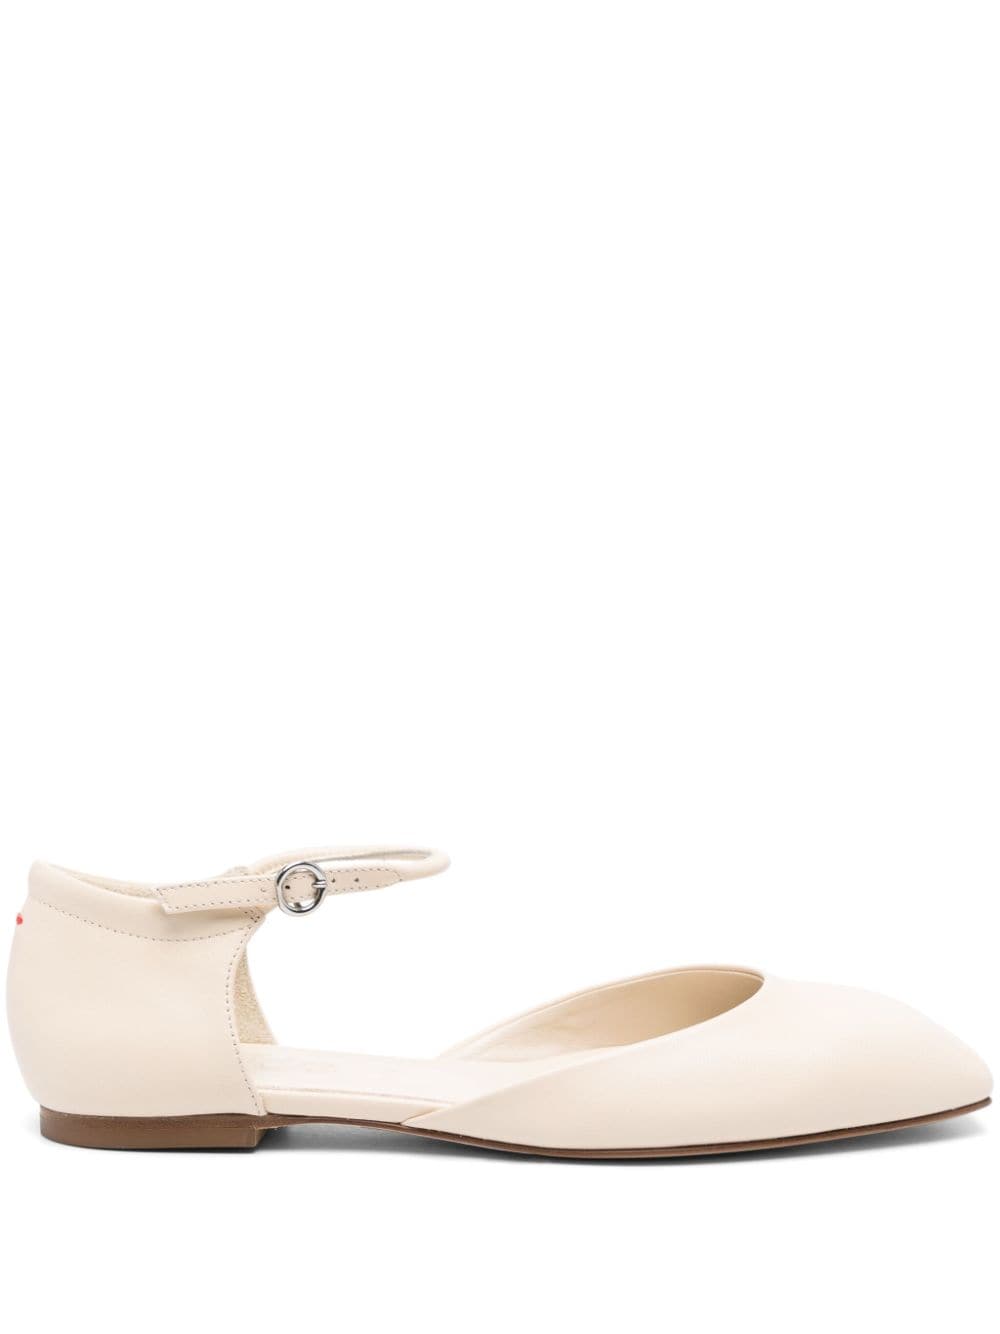 Aeyde Miri Square-toe Ballerina Shoes In Neutrals